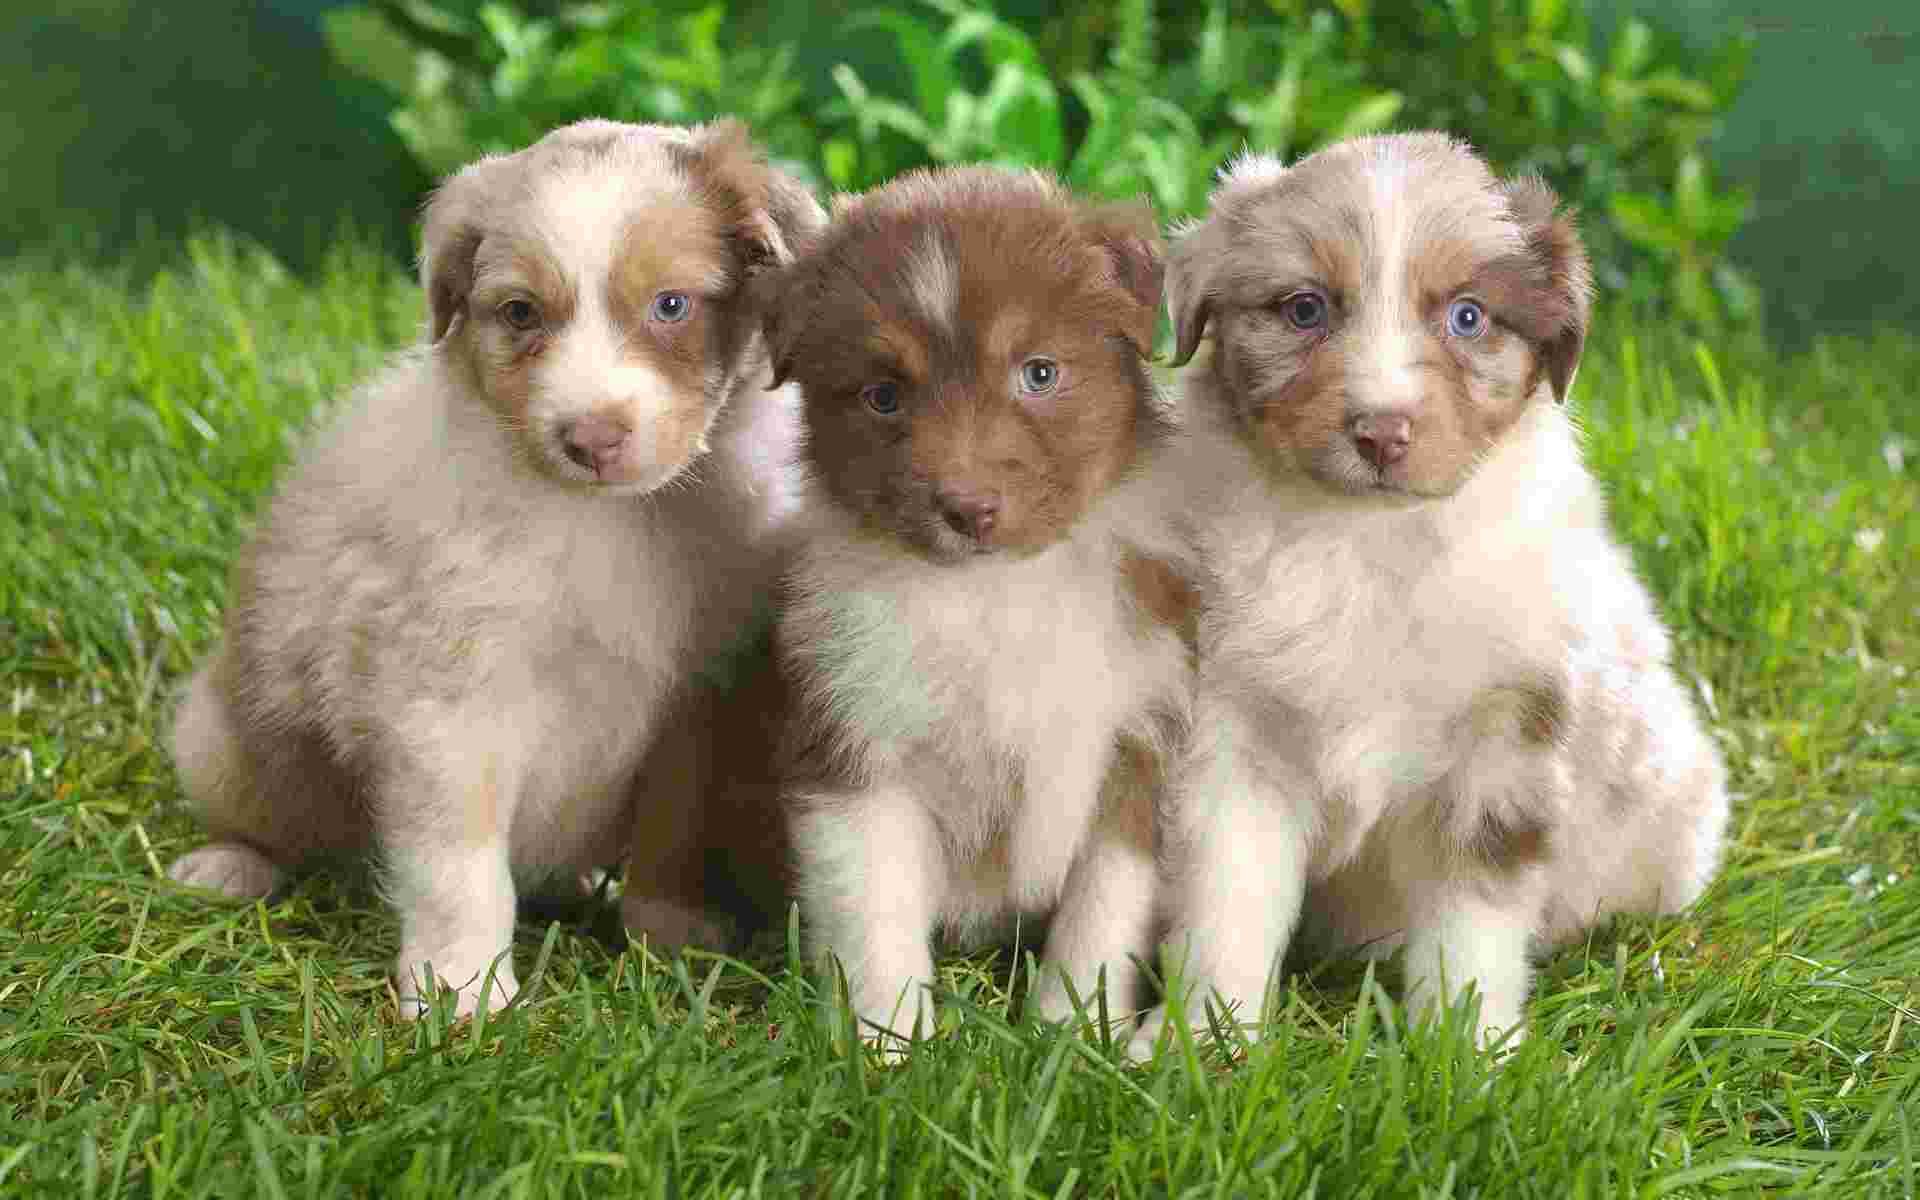 Cute Little Puppies Wallpaper Android Apps on Google Play